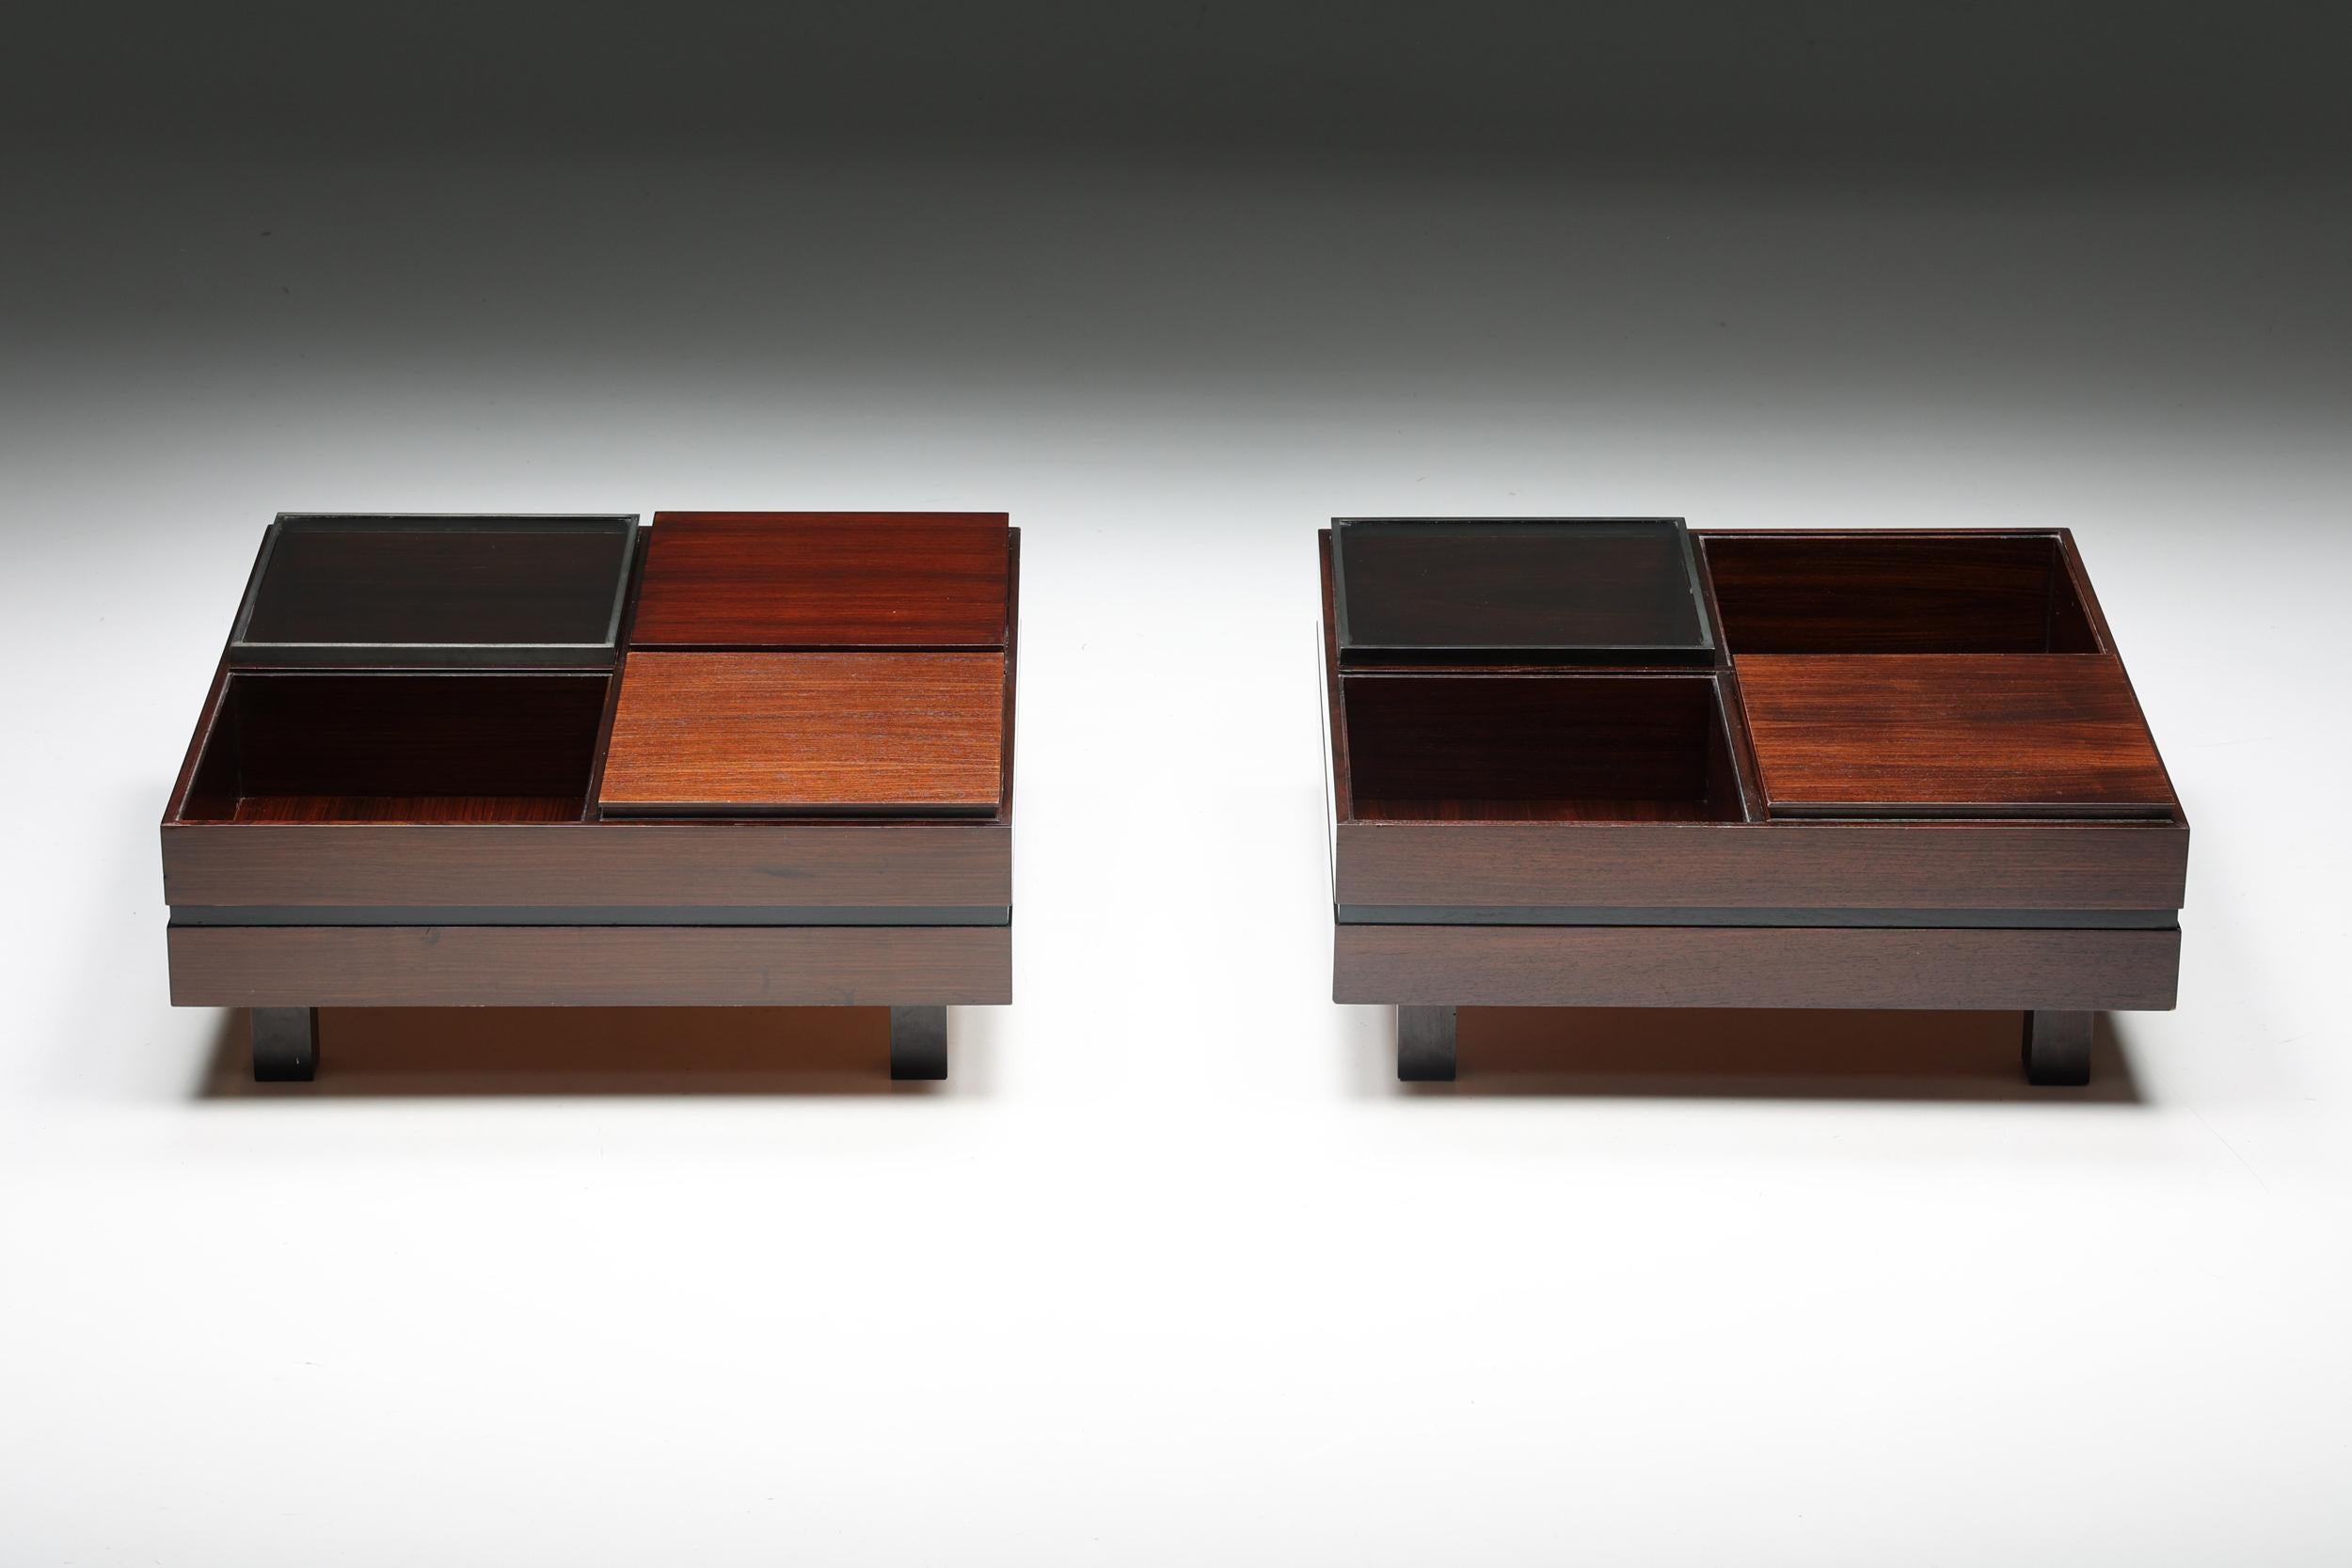 Coffee table; cocktail table; removable trays; Carlo Hauner; Forma; Italy; 1970s; Italian Design; Storage Table; Storage Unit; Martin Eisler; Teak; Glass; Wood; Mid-Century Modern;

These remarkable coffee tables with removable trays were designed